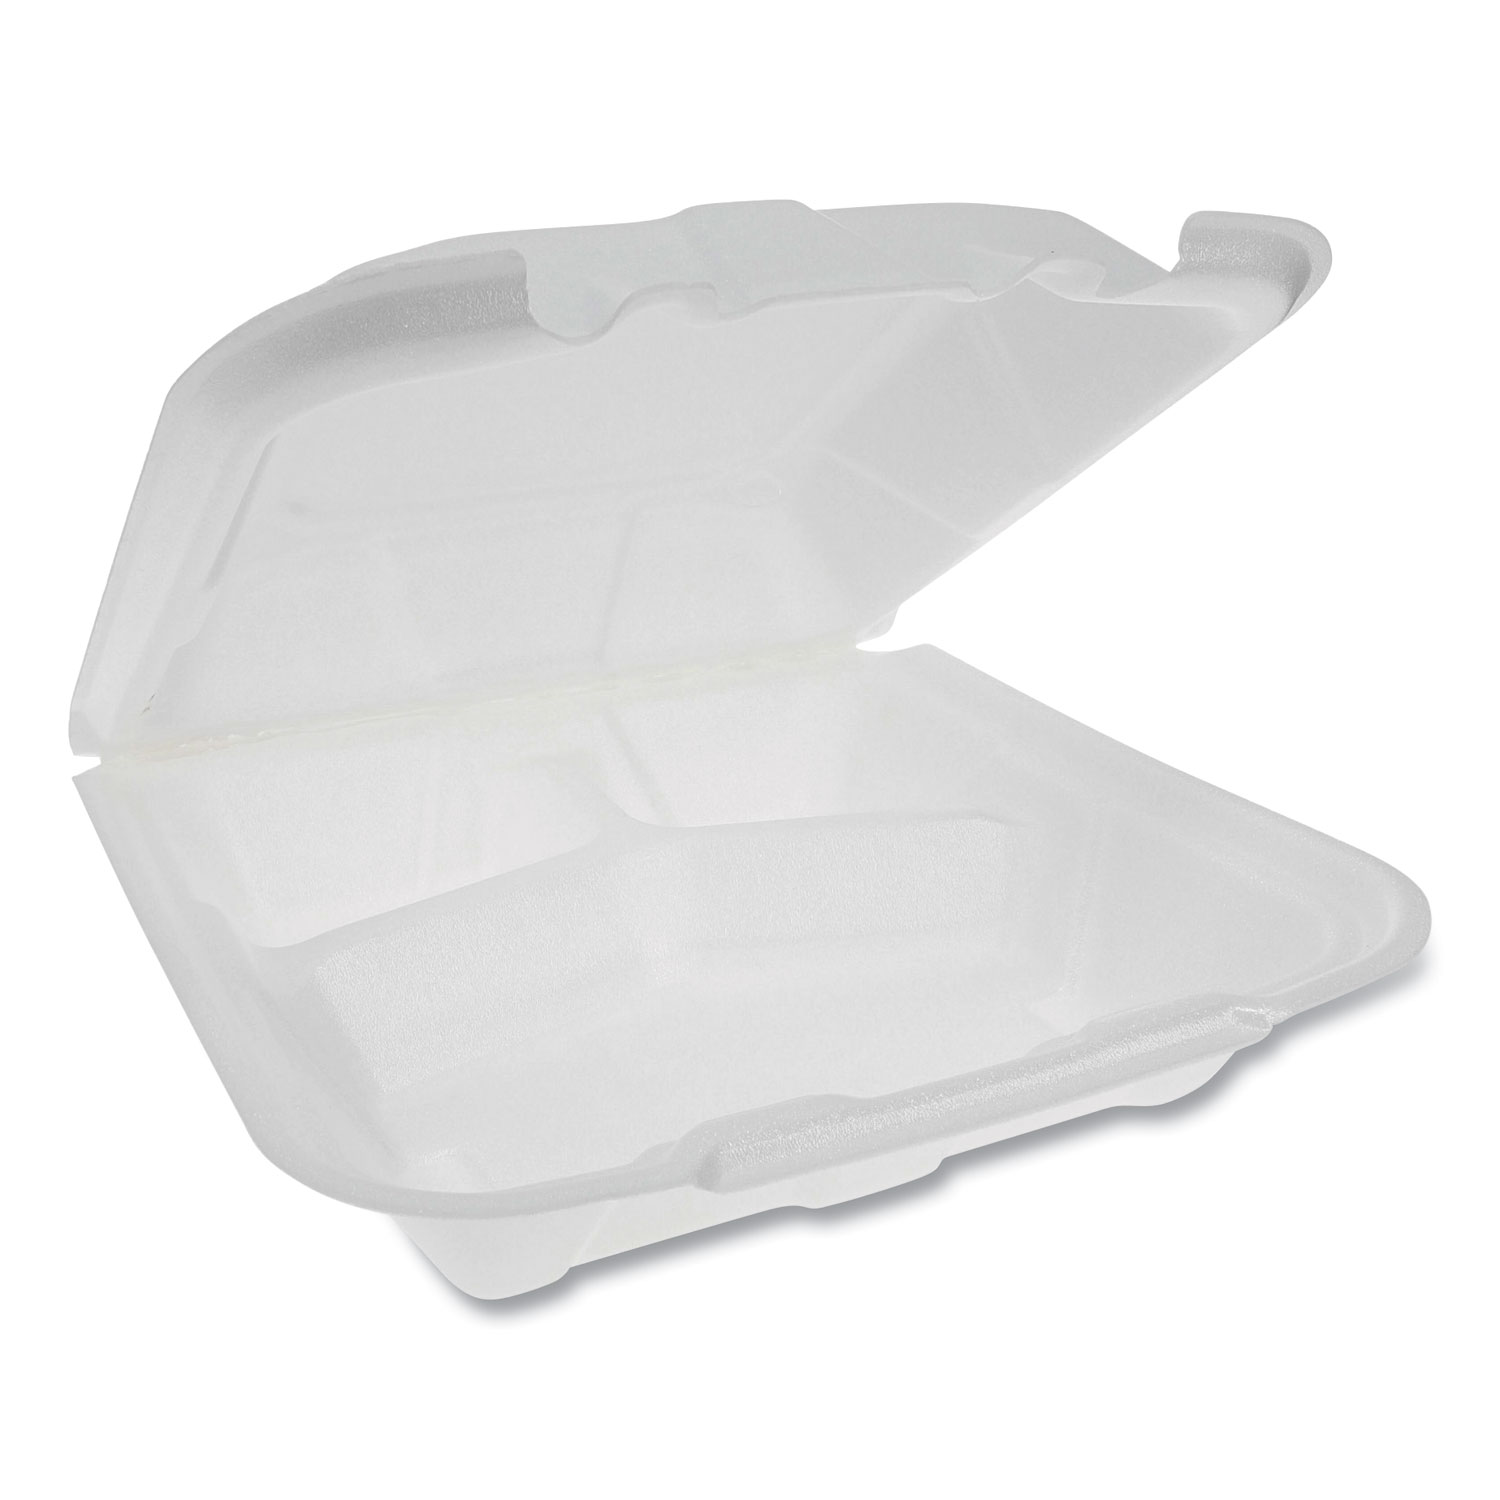  Pactiv YTD19903ECON Foam Hinged Lid Containers, Dual Tab Lock Economy, 9.13 x 9 x 3.25, 3-Compartment, White, 150/Carton (PCTYTD19903ECON) 